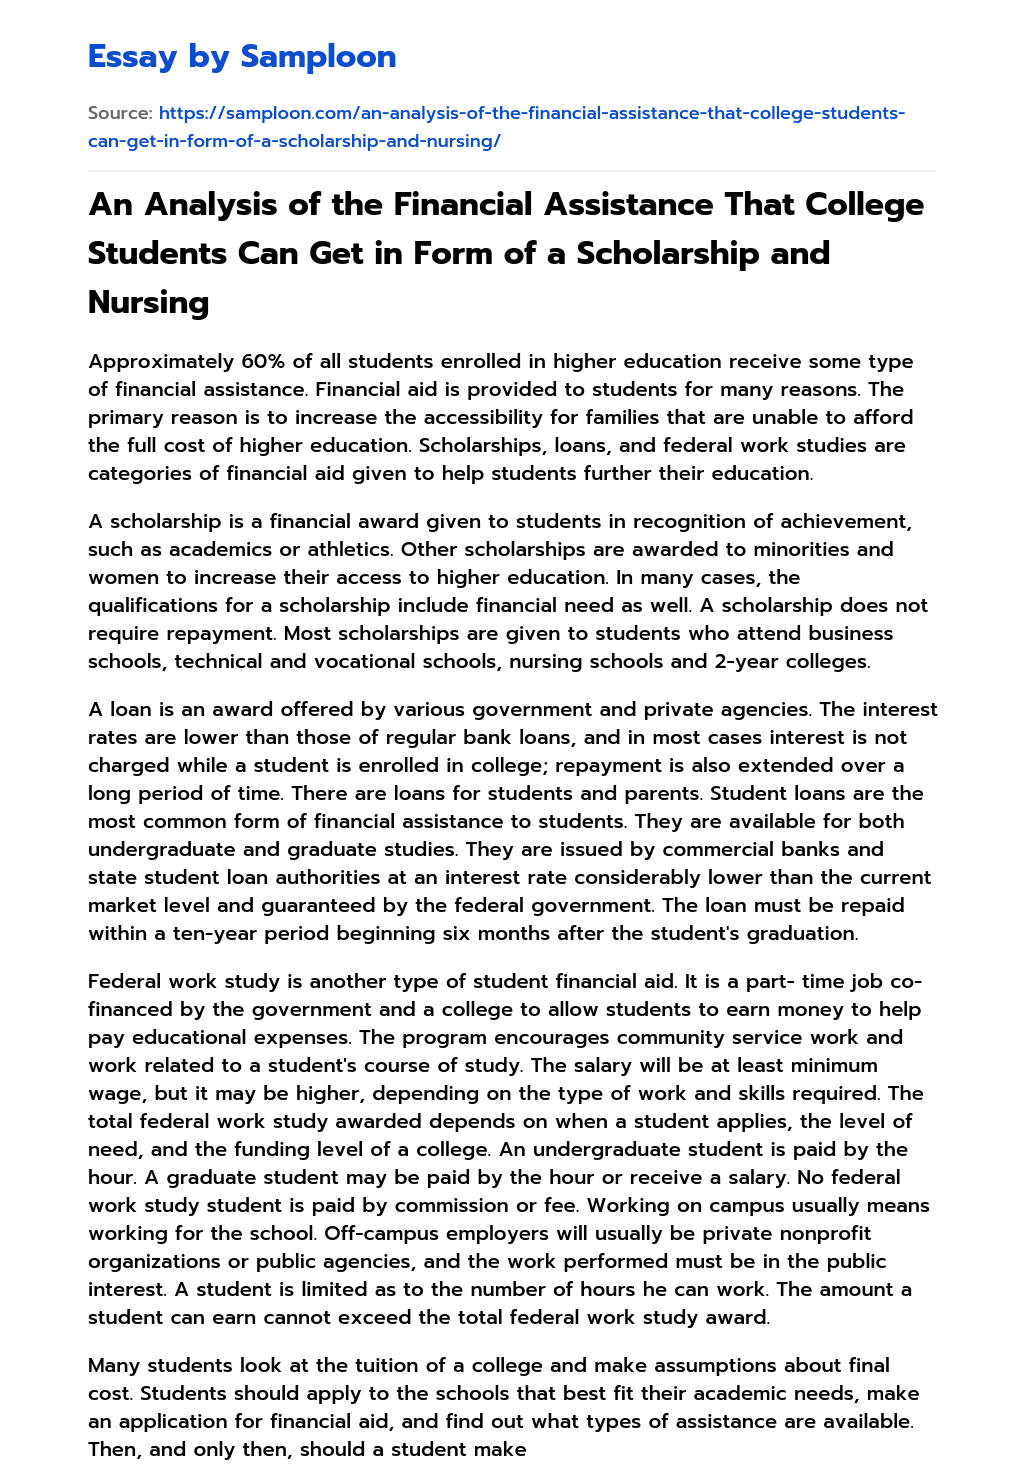 An Analysis of the Financial Assistance That College Students Can Get in Form of a Scholarship and Nursing essay